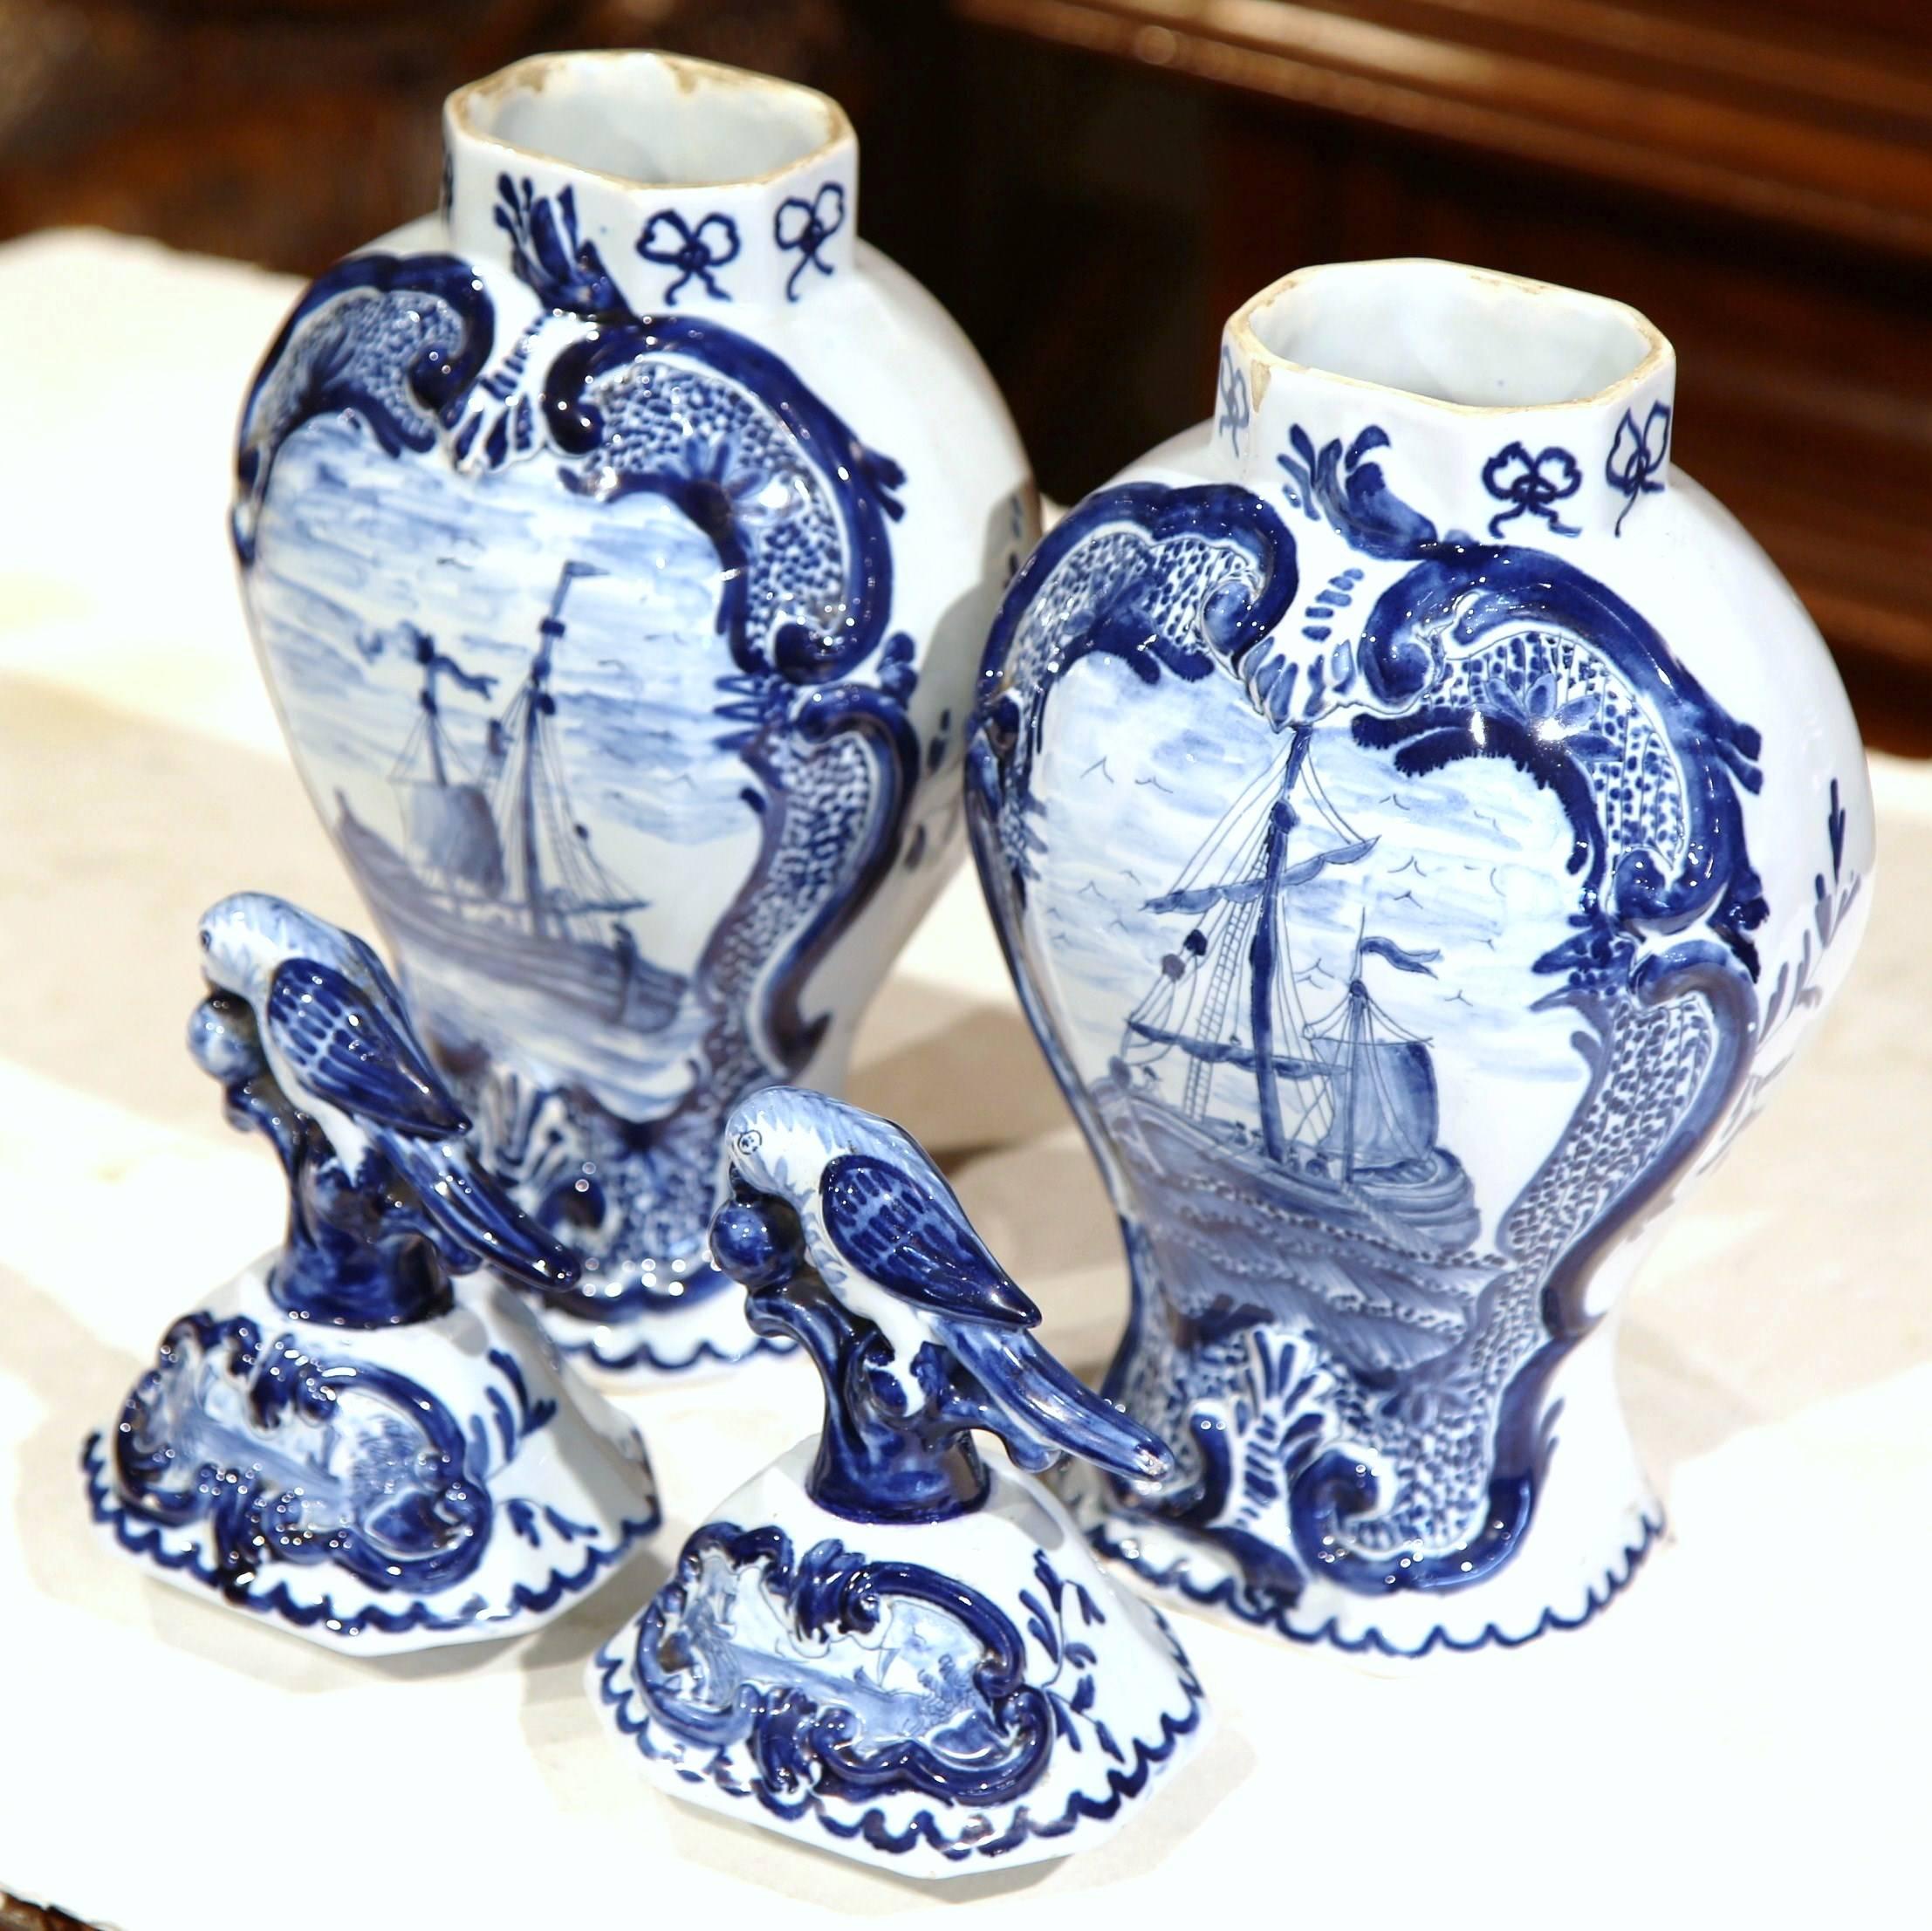 This elegant pair of faience vases were sculpted in France, circa 1920. Created in the manner of Delft, both of the classic blue and white vases feature maritime sailboat and lids with a parrot picking a cherry. The porcelain pieces are signed on